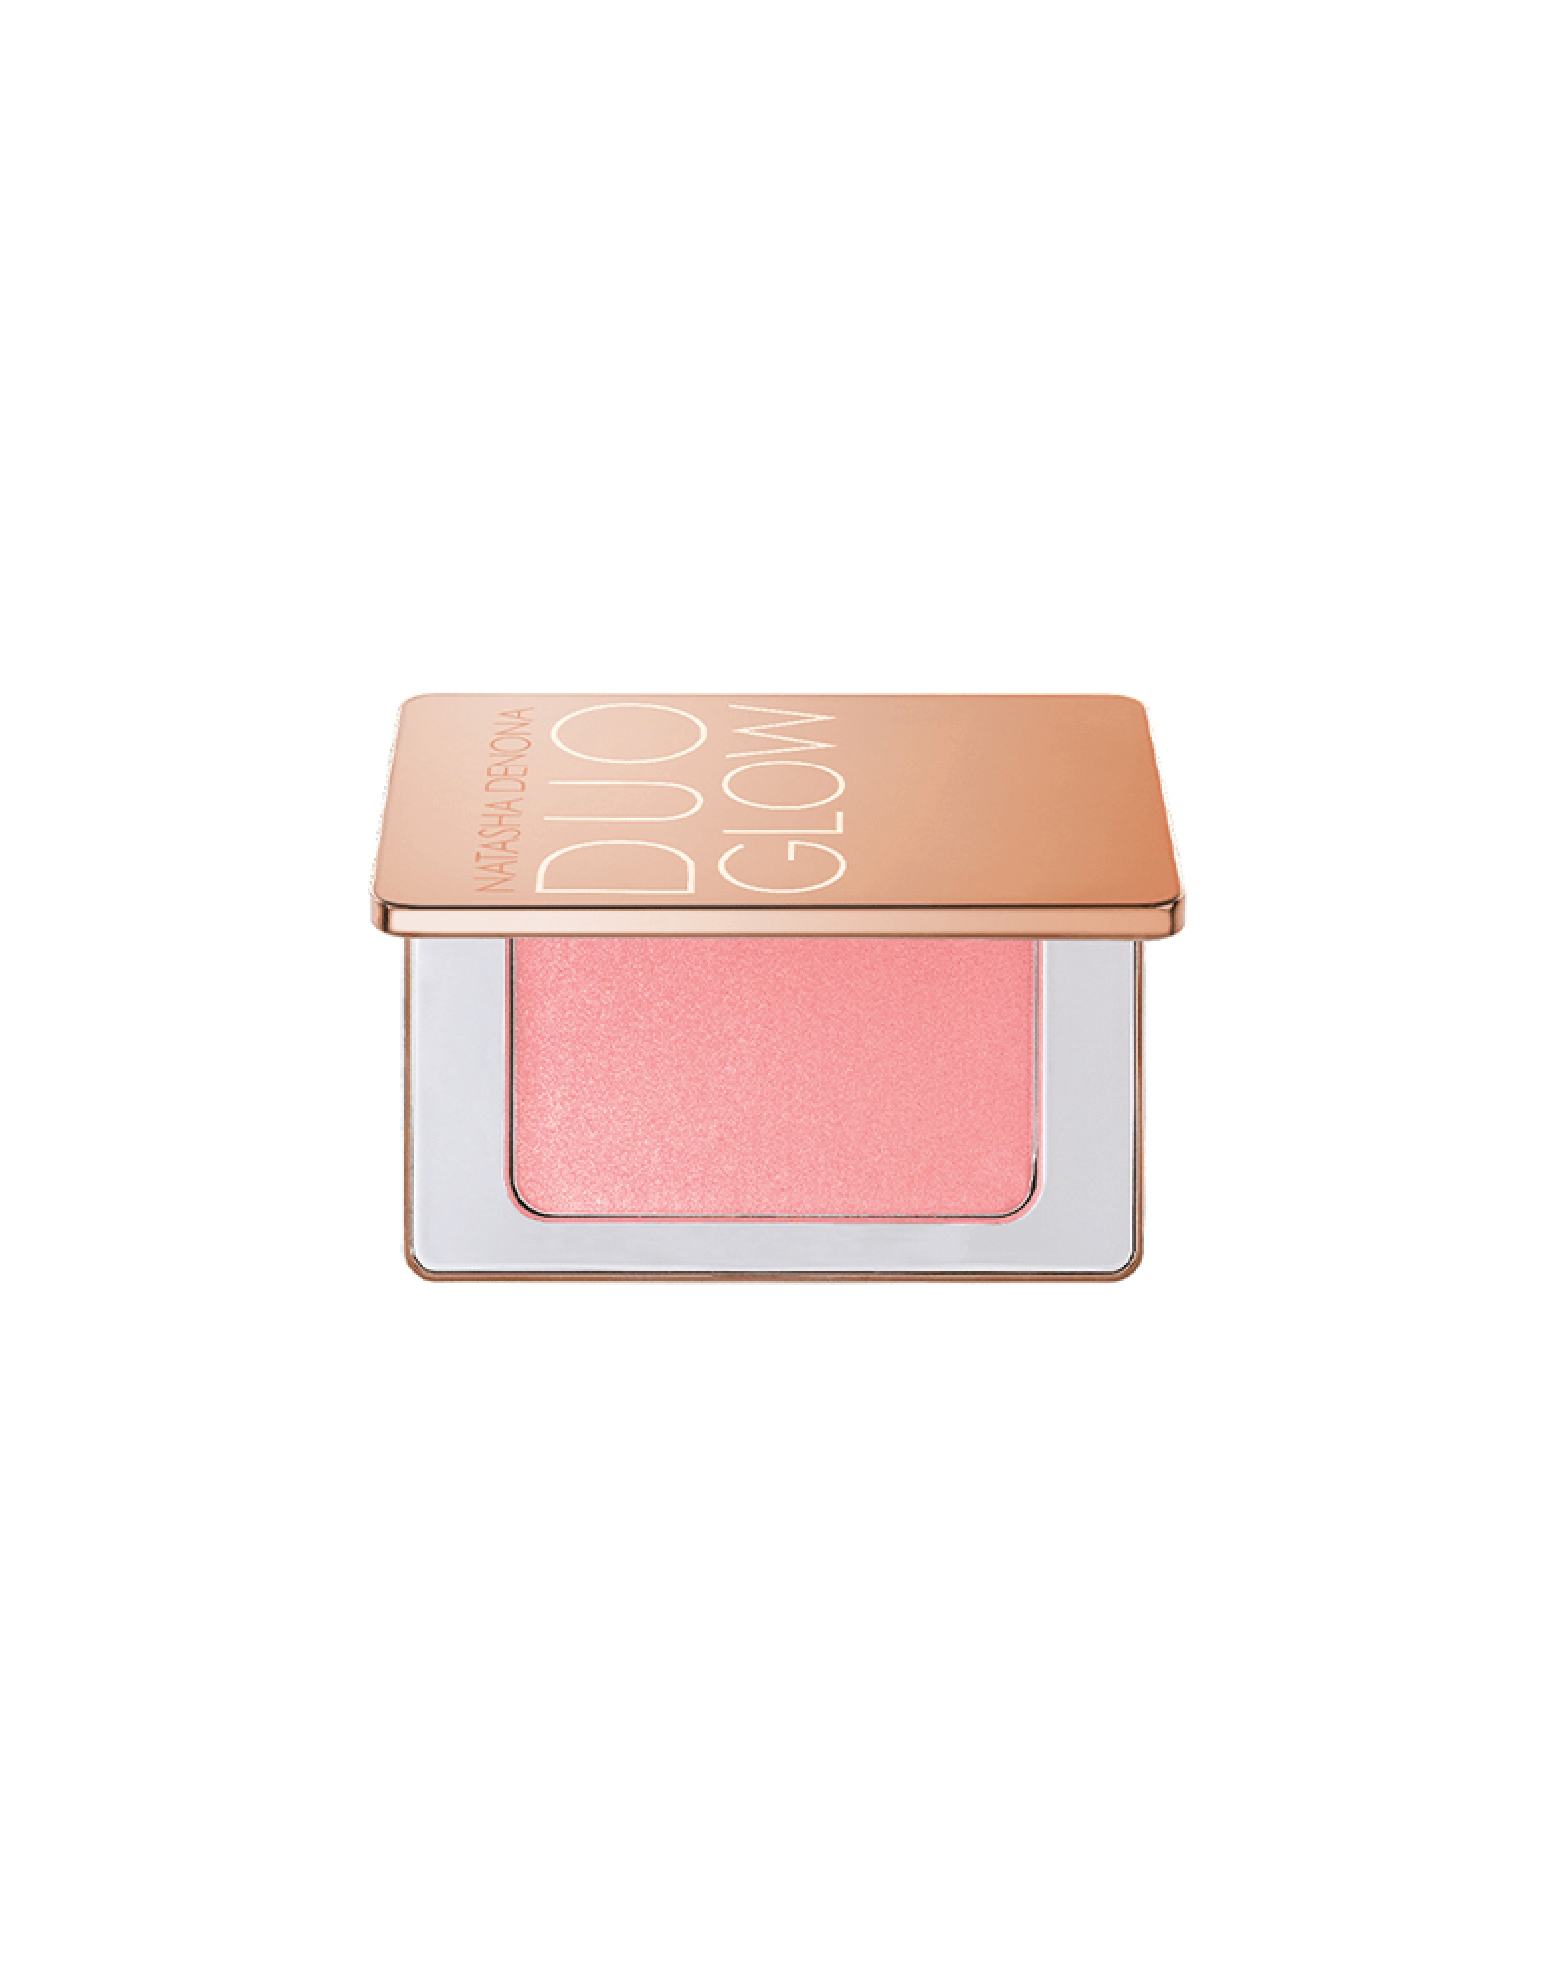 The GLOW on this blush is INSANE! Such a unique formula with the most